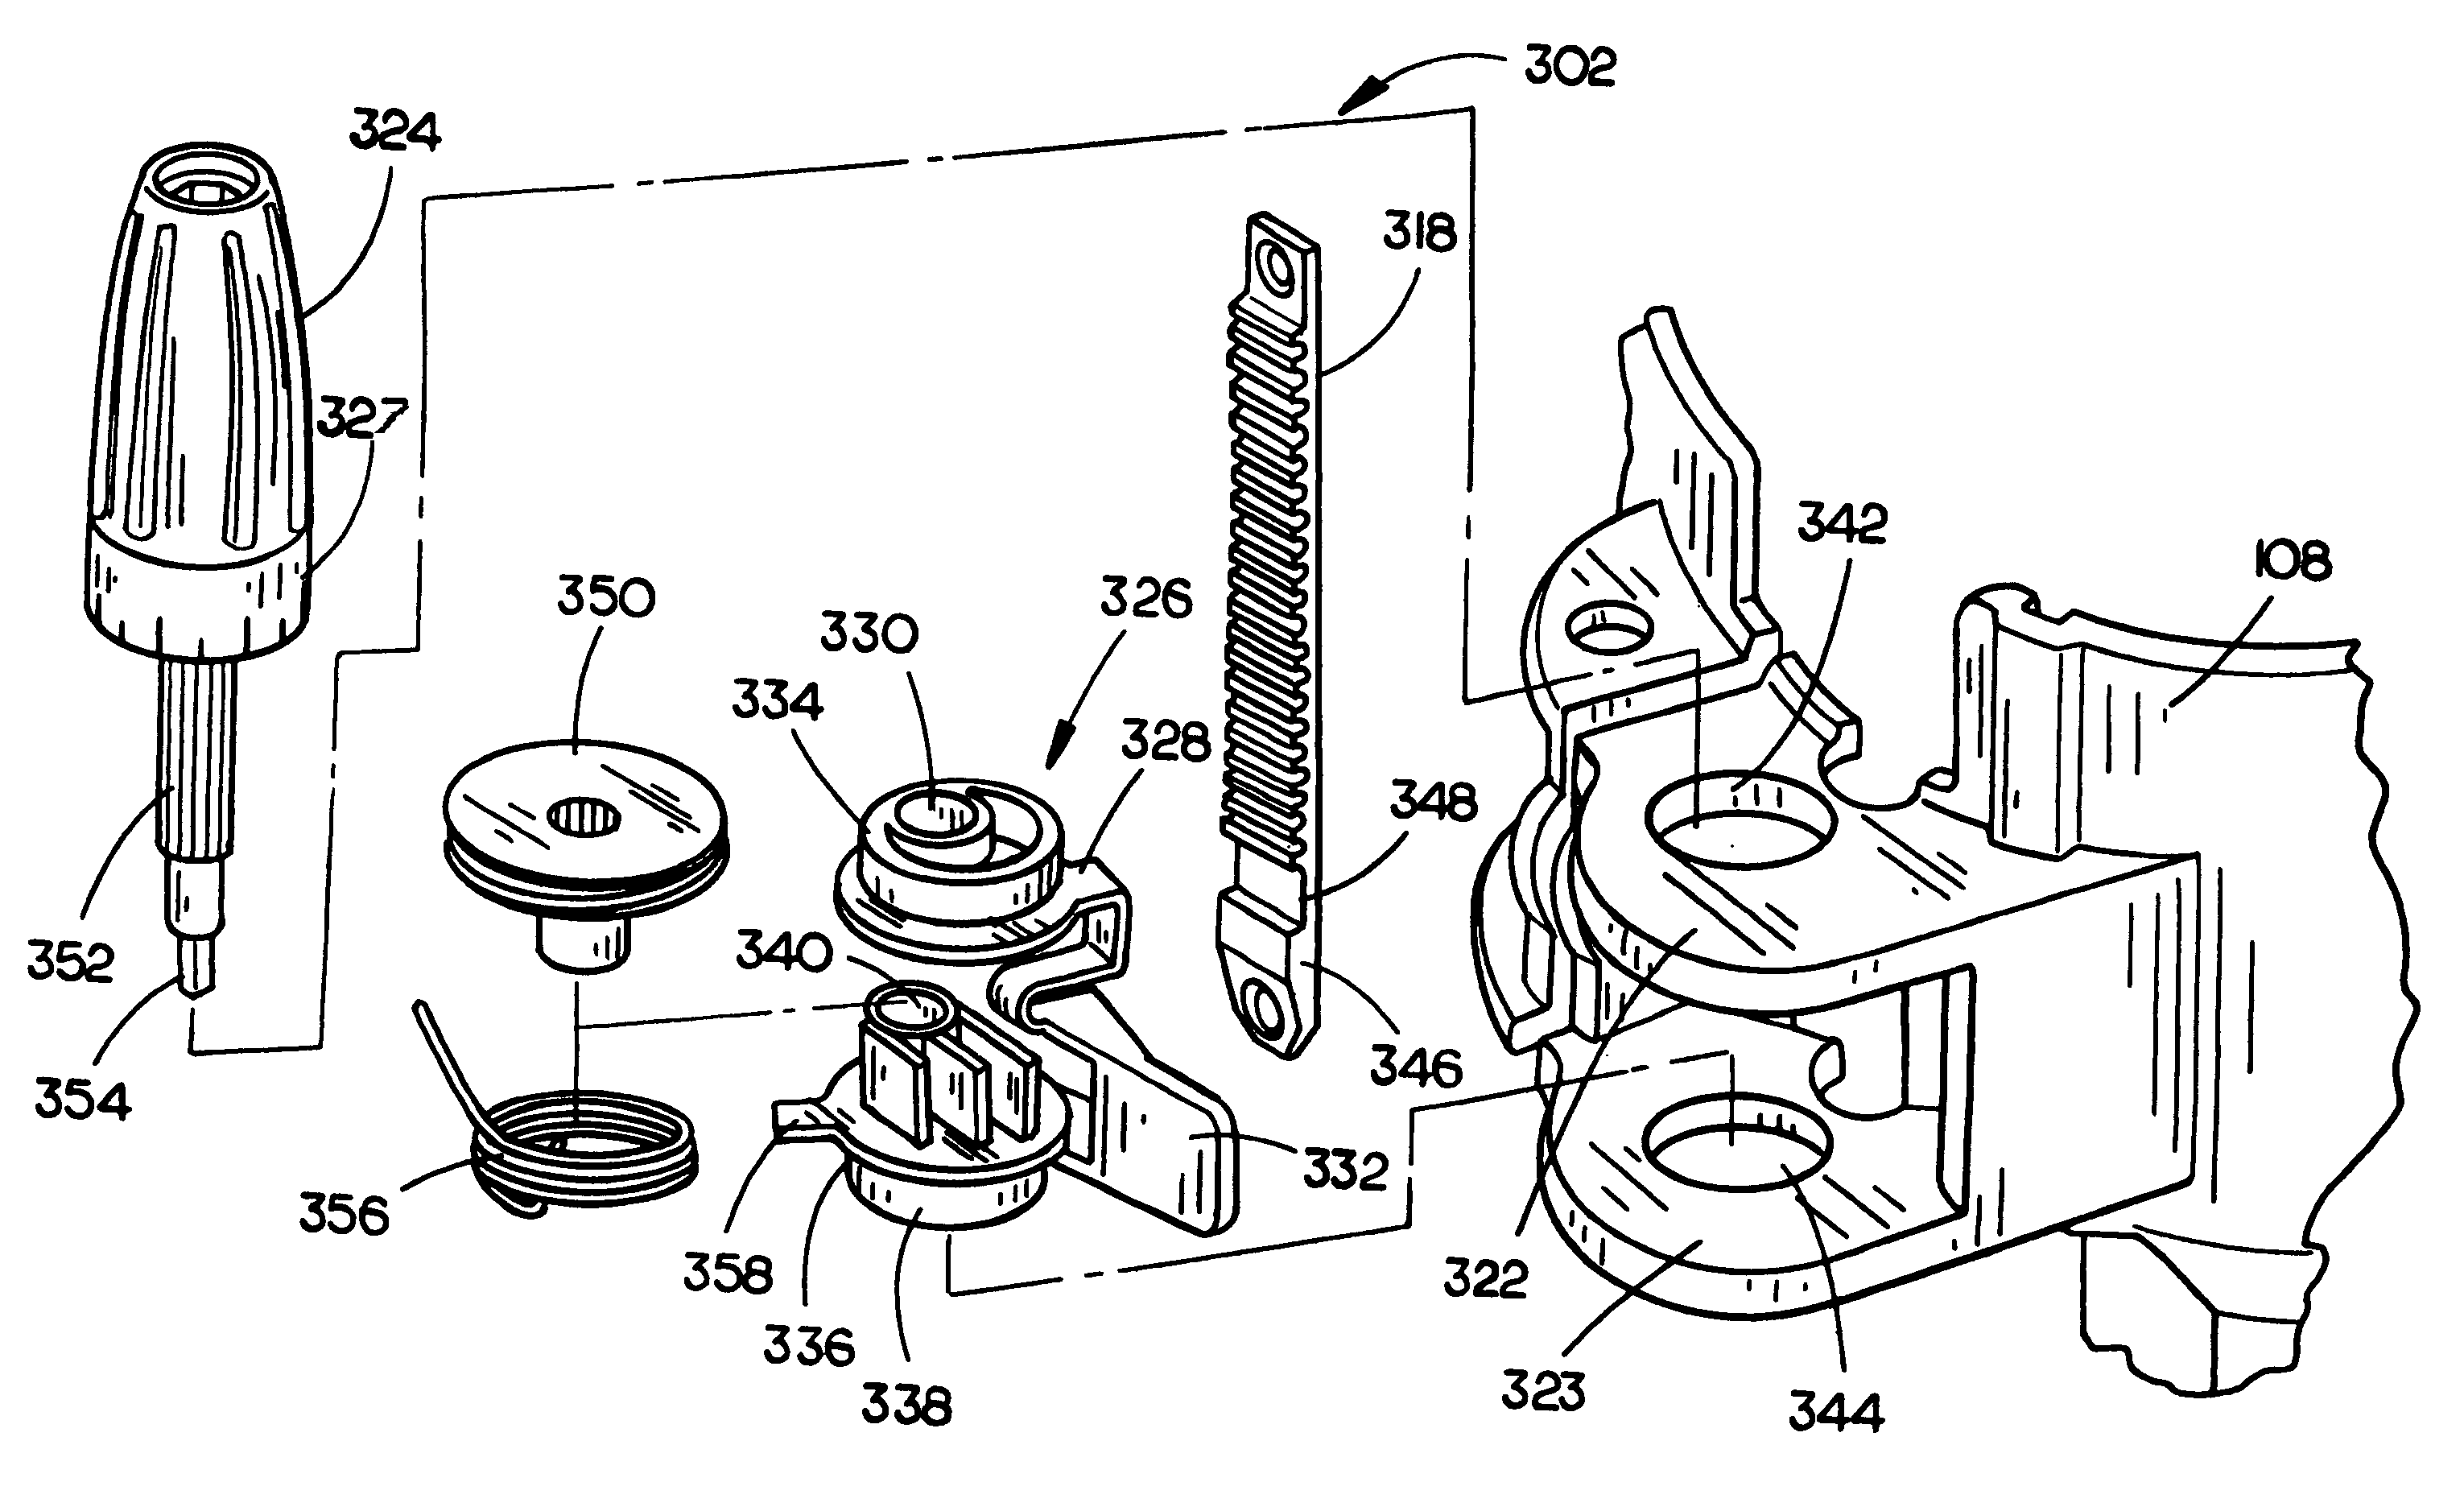 Router elevating mechanism